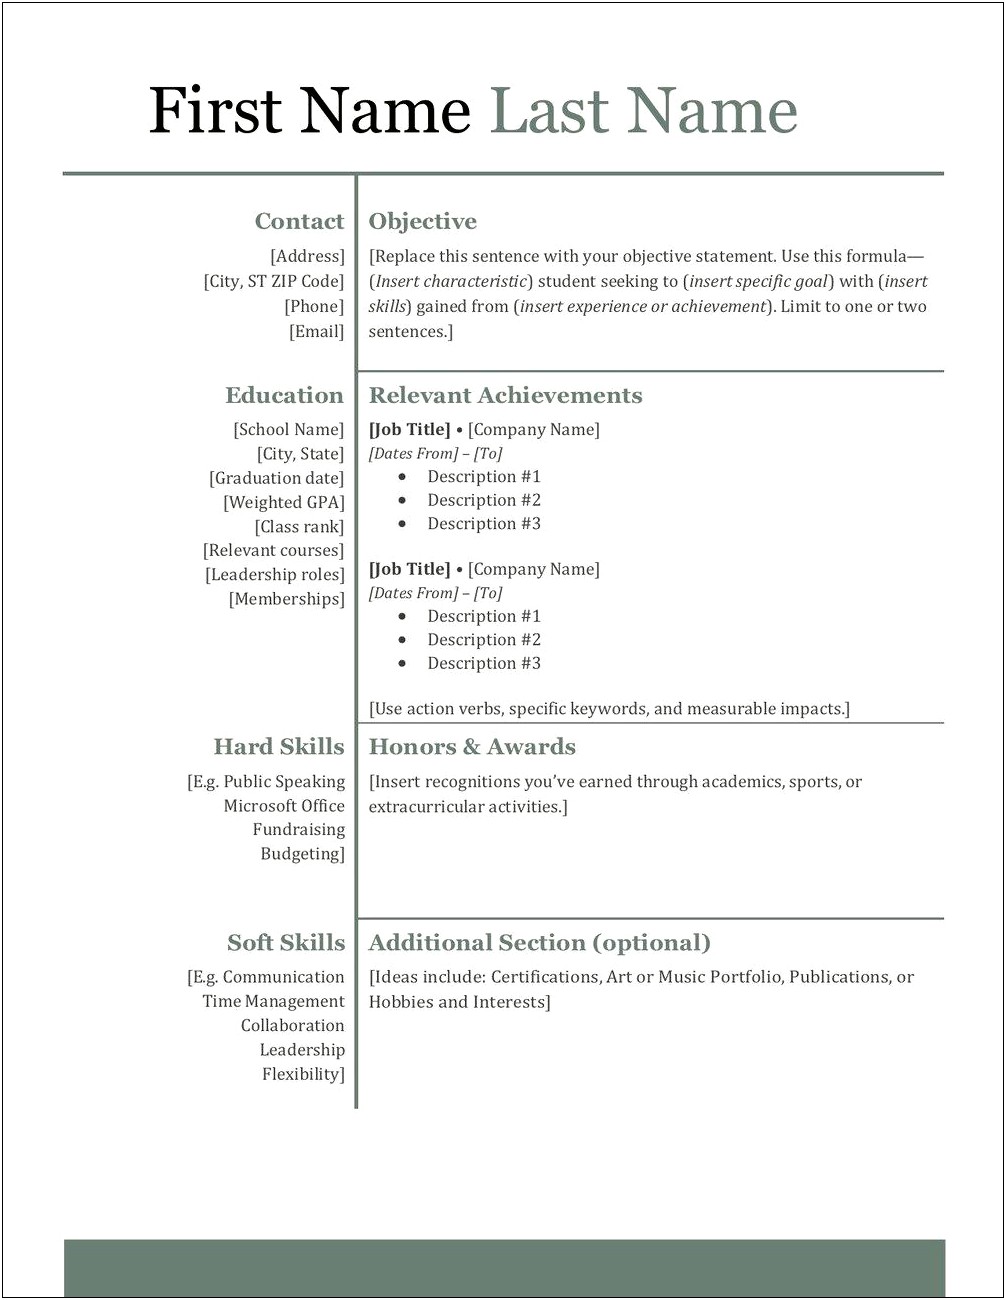 Sample Of A High School Student Resume Heading